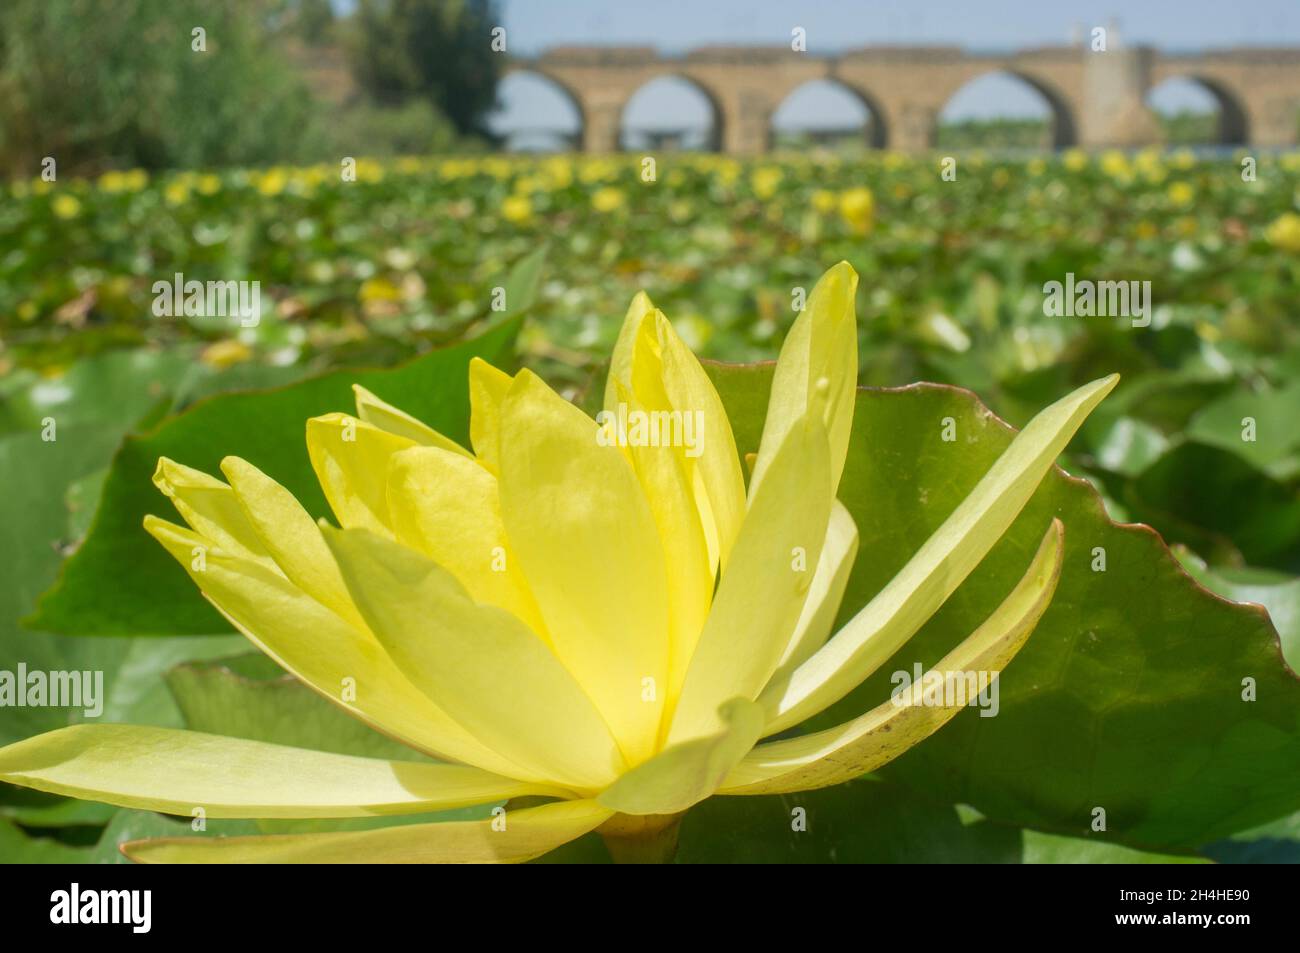 Mexican waterlily. Highly problematic invasive specie. Bridges on background Stock Photo